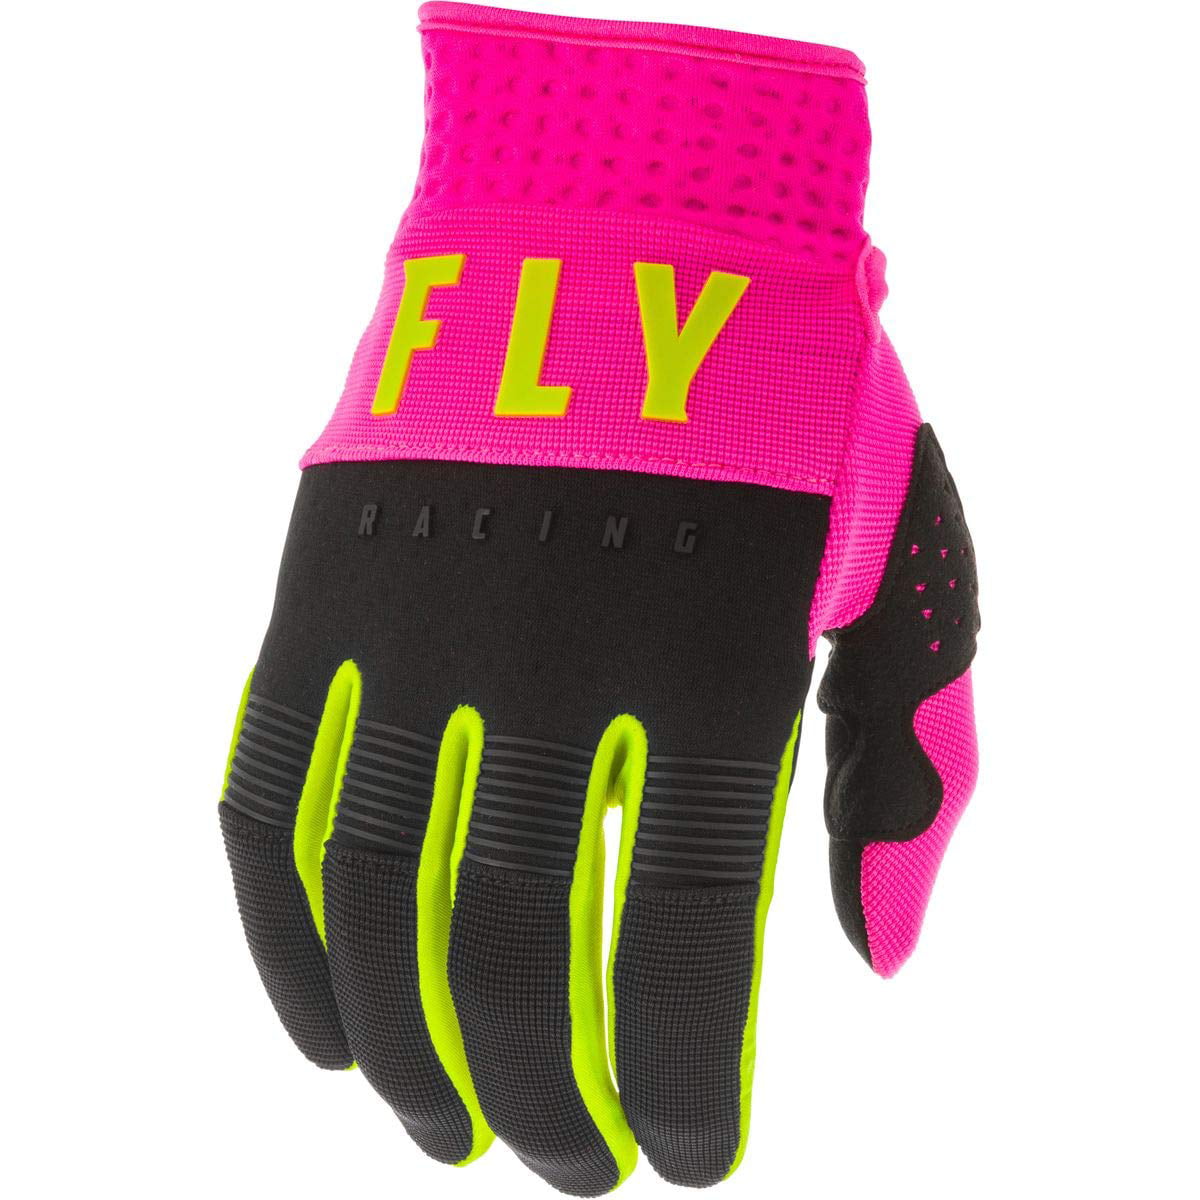 NEW FLY RACING F-16 MX MOTORCYCLE GLOVES ADULT YOUTH ALL COLORS ALL SIZES